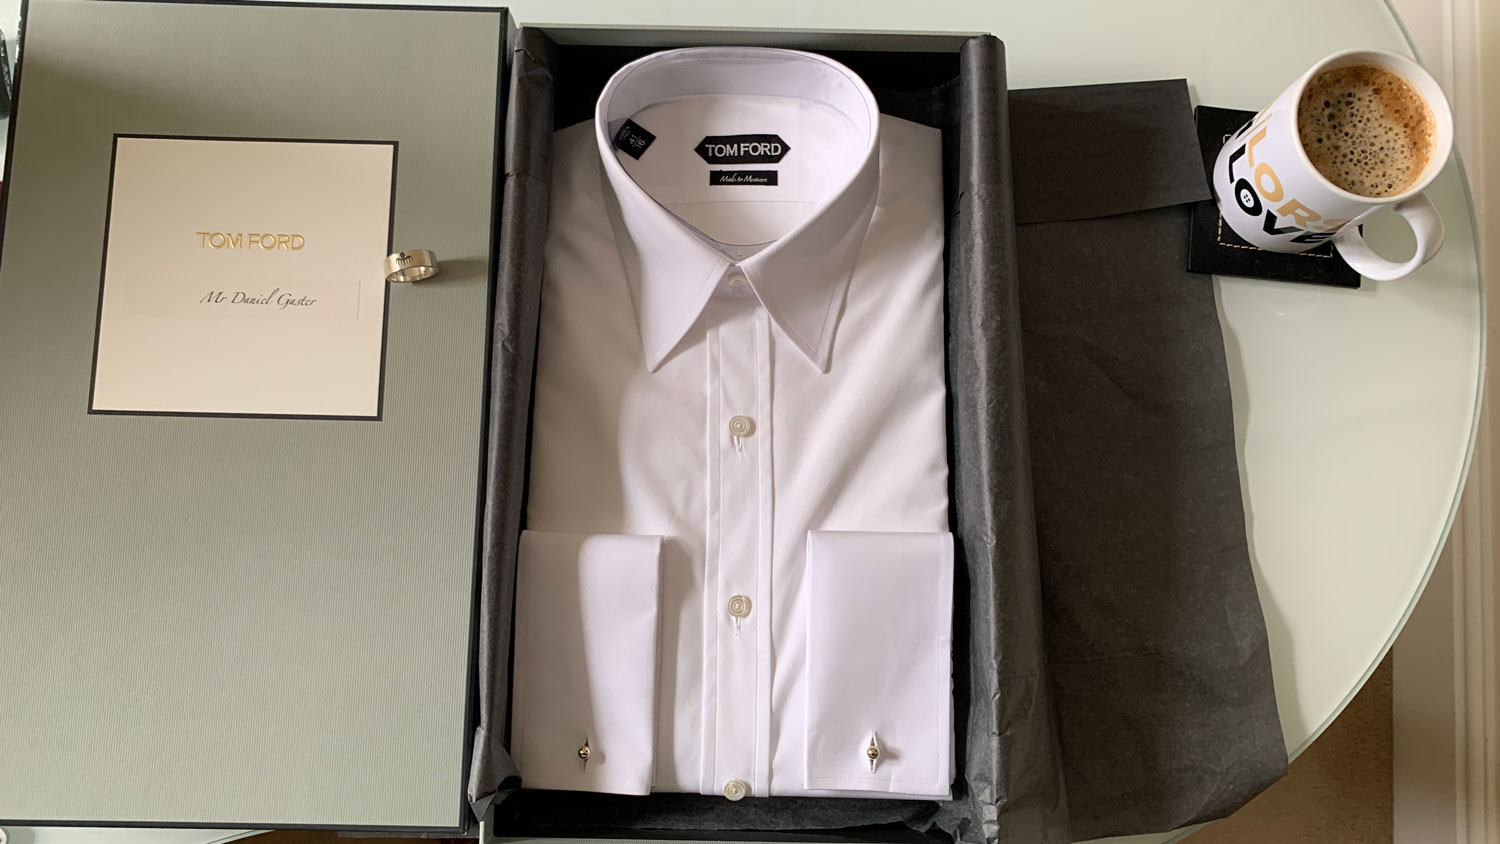 Spectre Shirt in a TOM FORD box